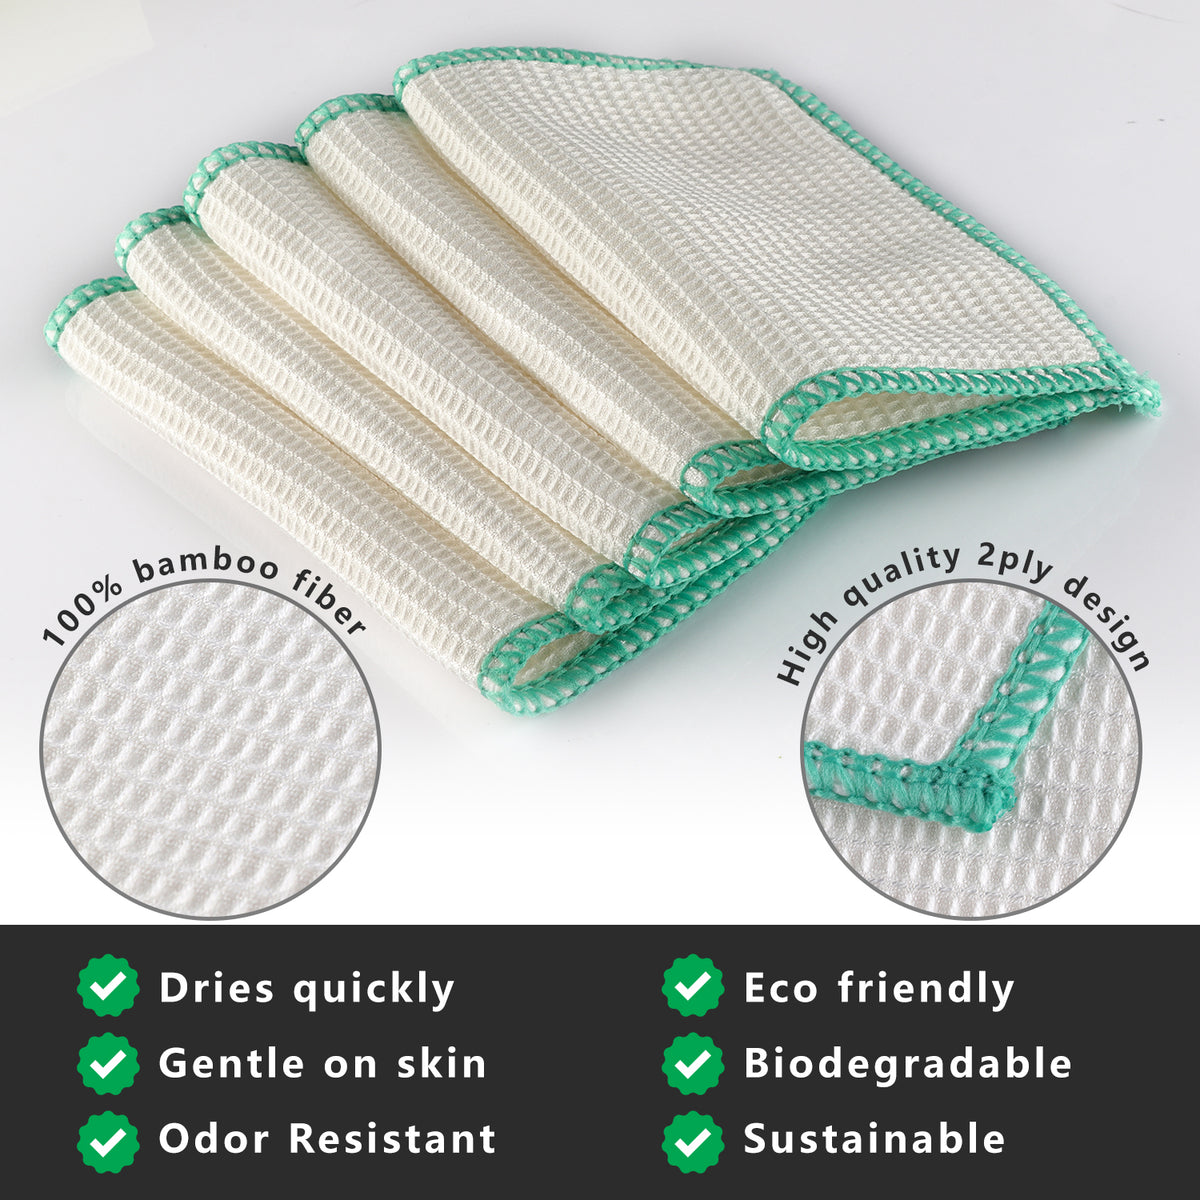 100% Bamboo Eco-Friendly Dish Cloths 12 Pack